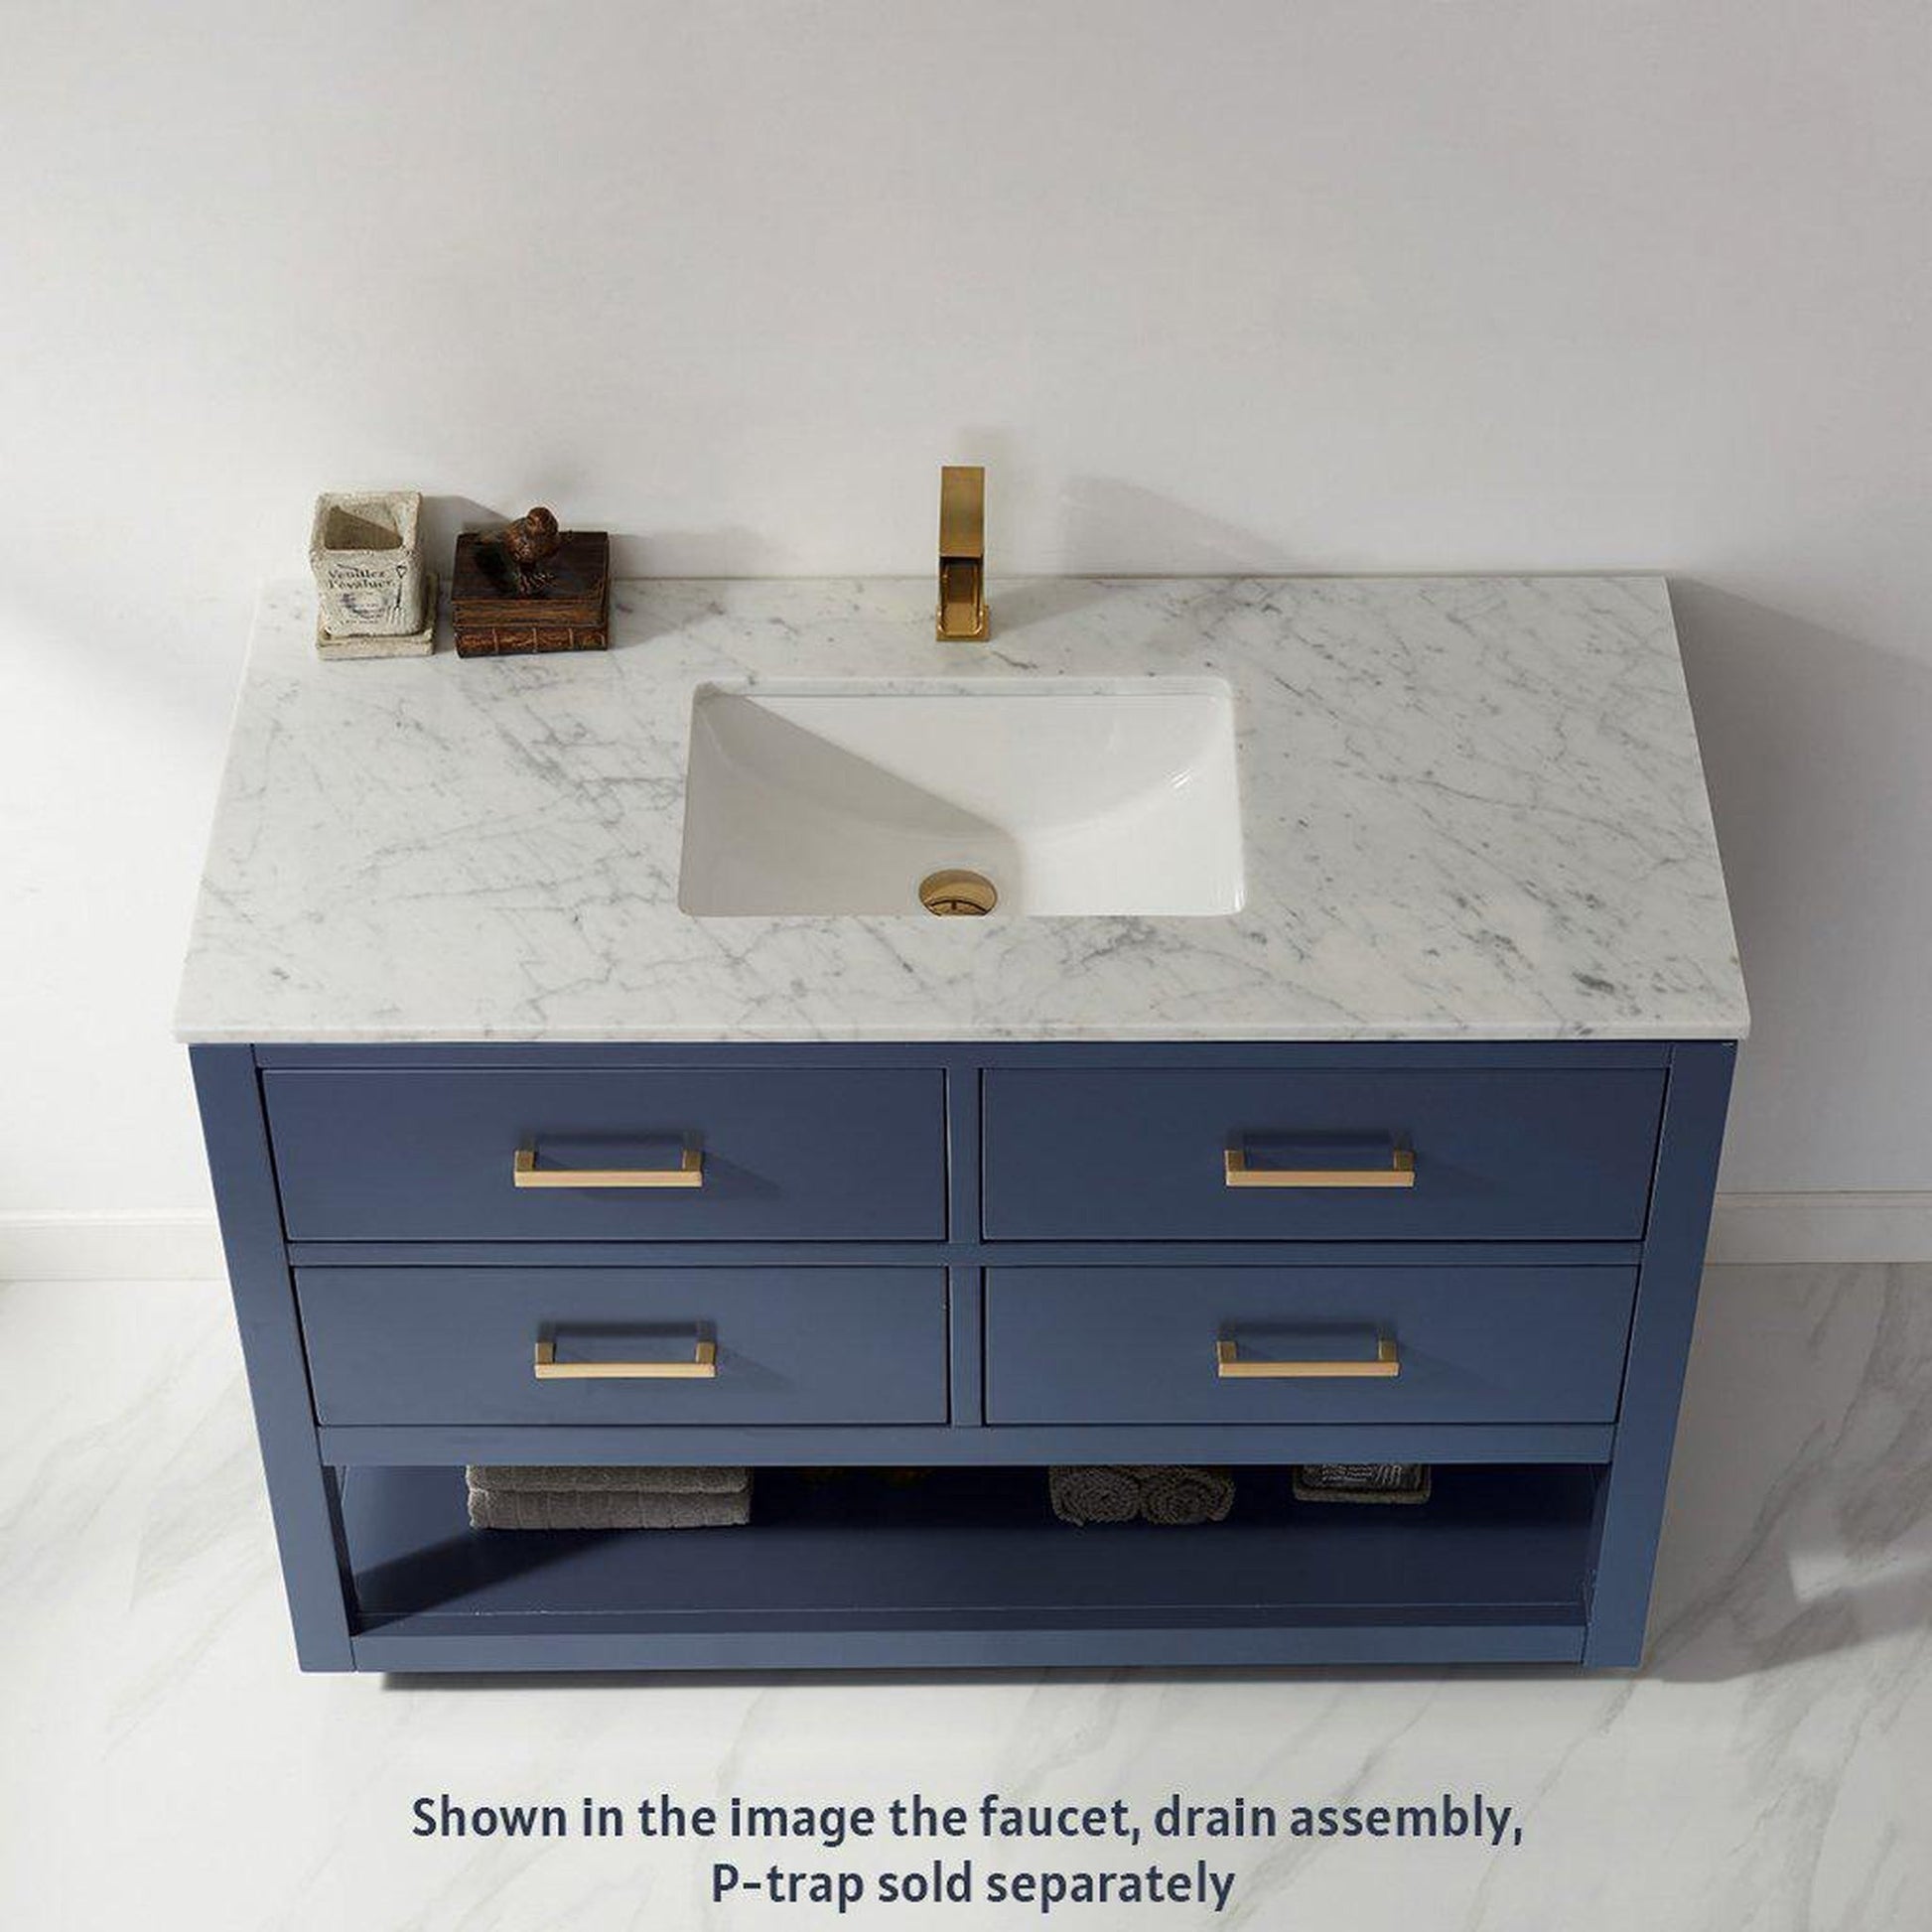 Altair Remi 48" Single Royal Blue Freestanding Bathroom Vanity Set With Natural Carrara White Marble Top, Rectangular Undermount Ceramic Sink, and Overflow